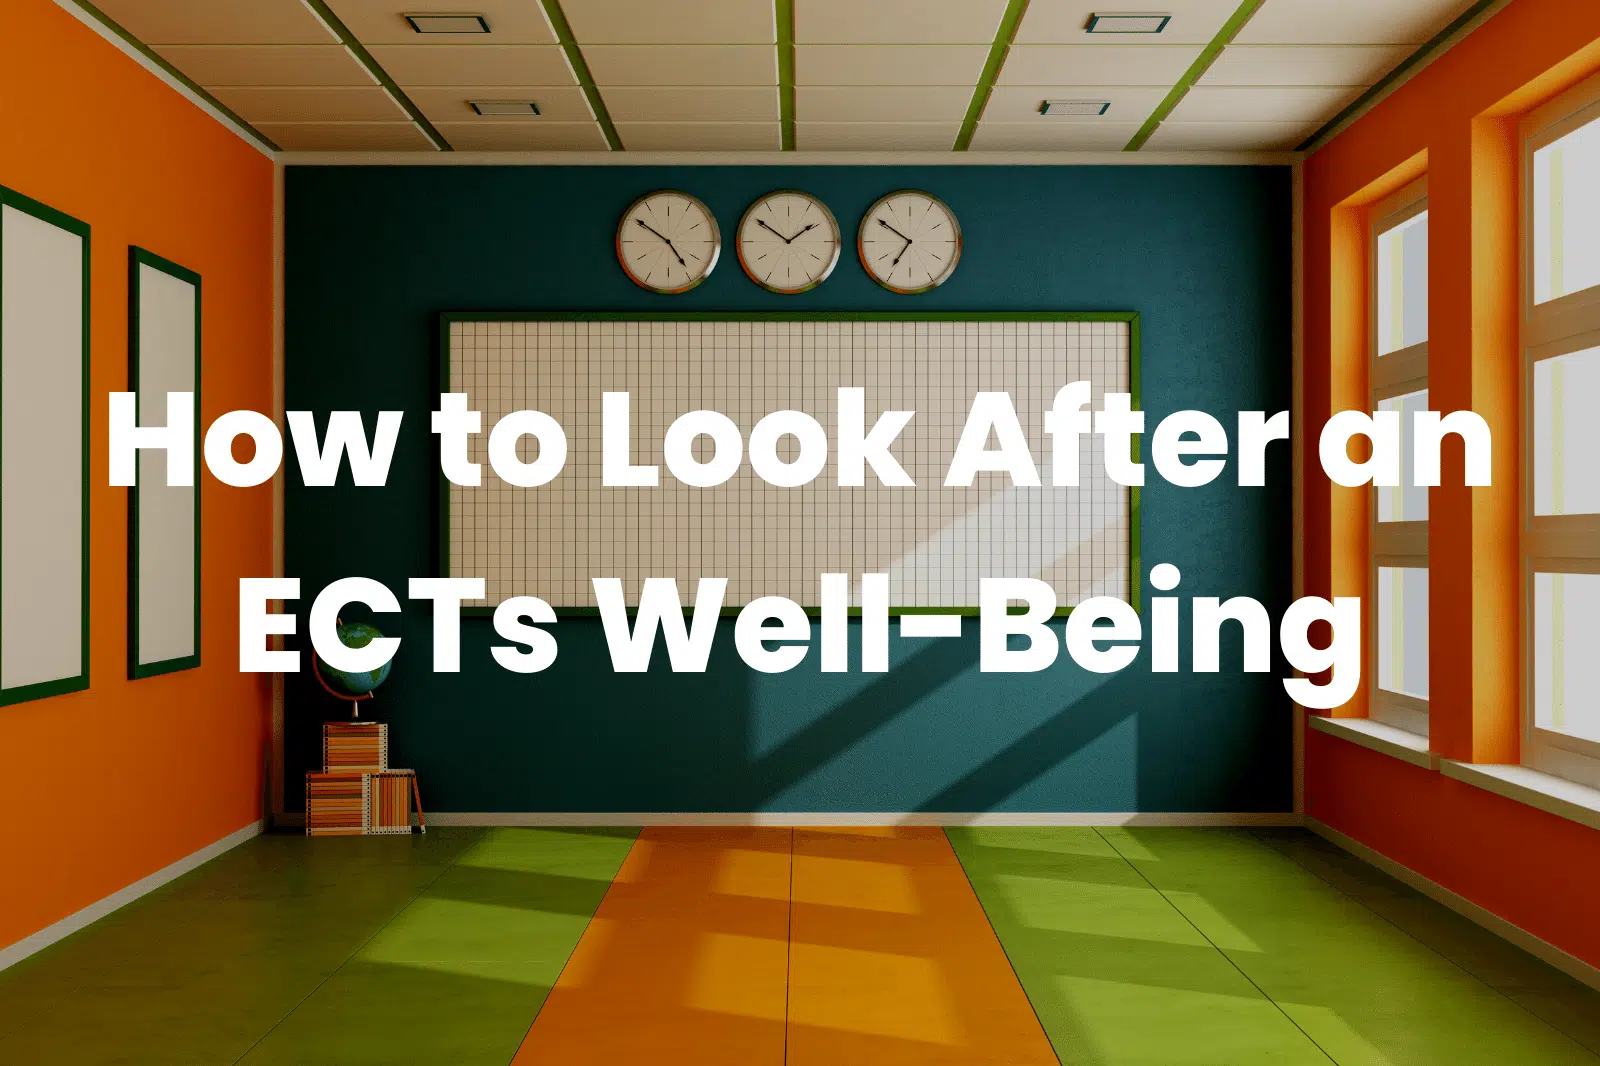 ECTs Well-Being